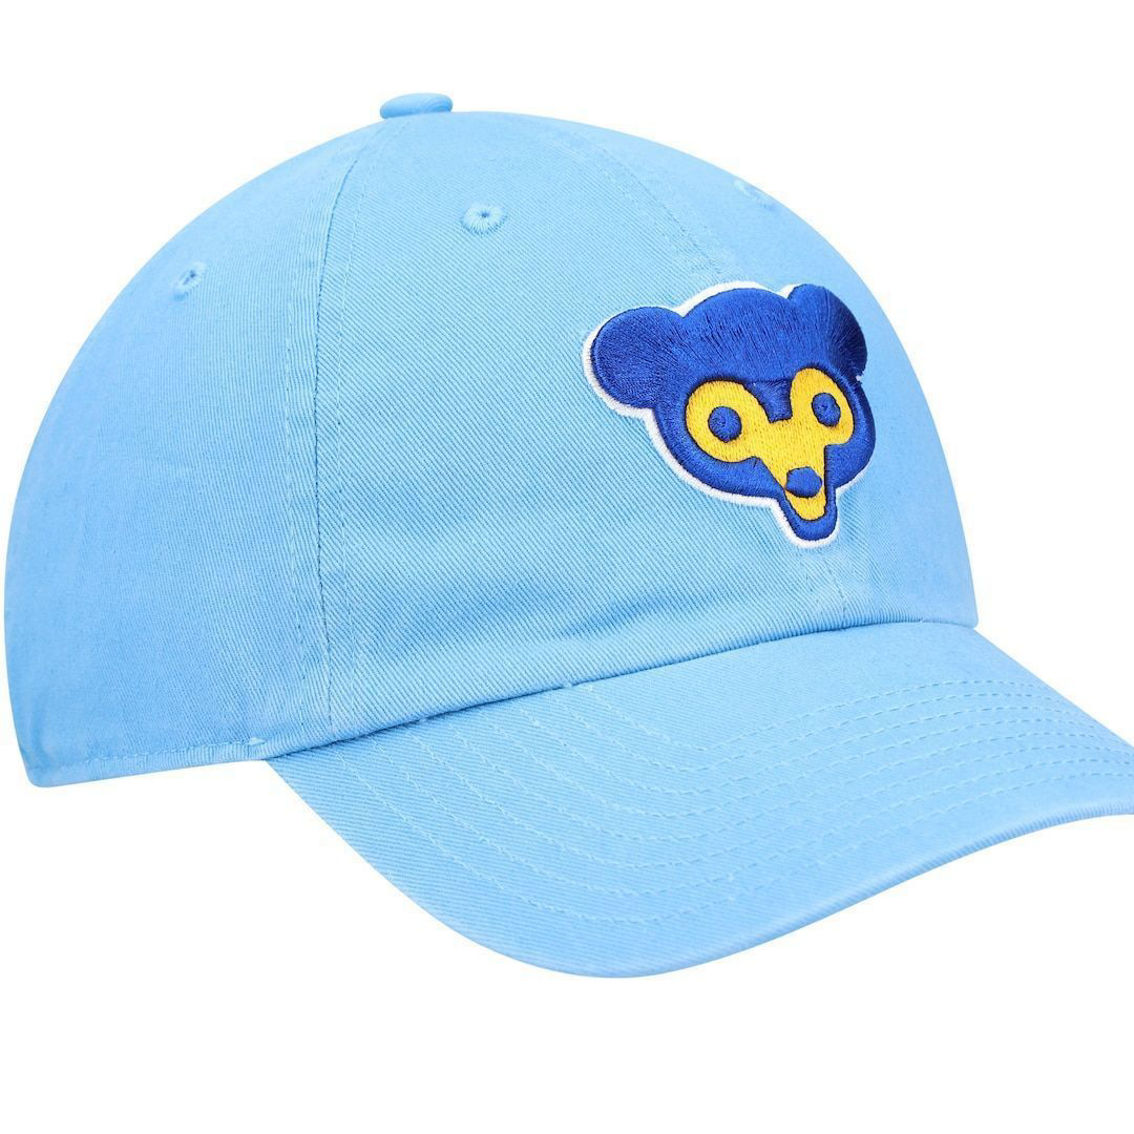 '47 Men's Light Blue Chicago Cubs Logo Cooperstown Collection Clean Up Adjustable Hat - Image 4 of 4